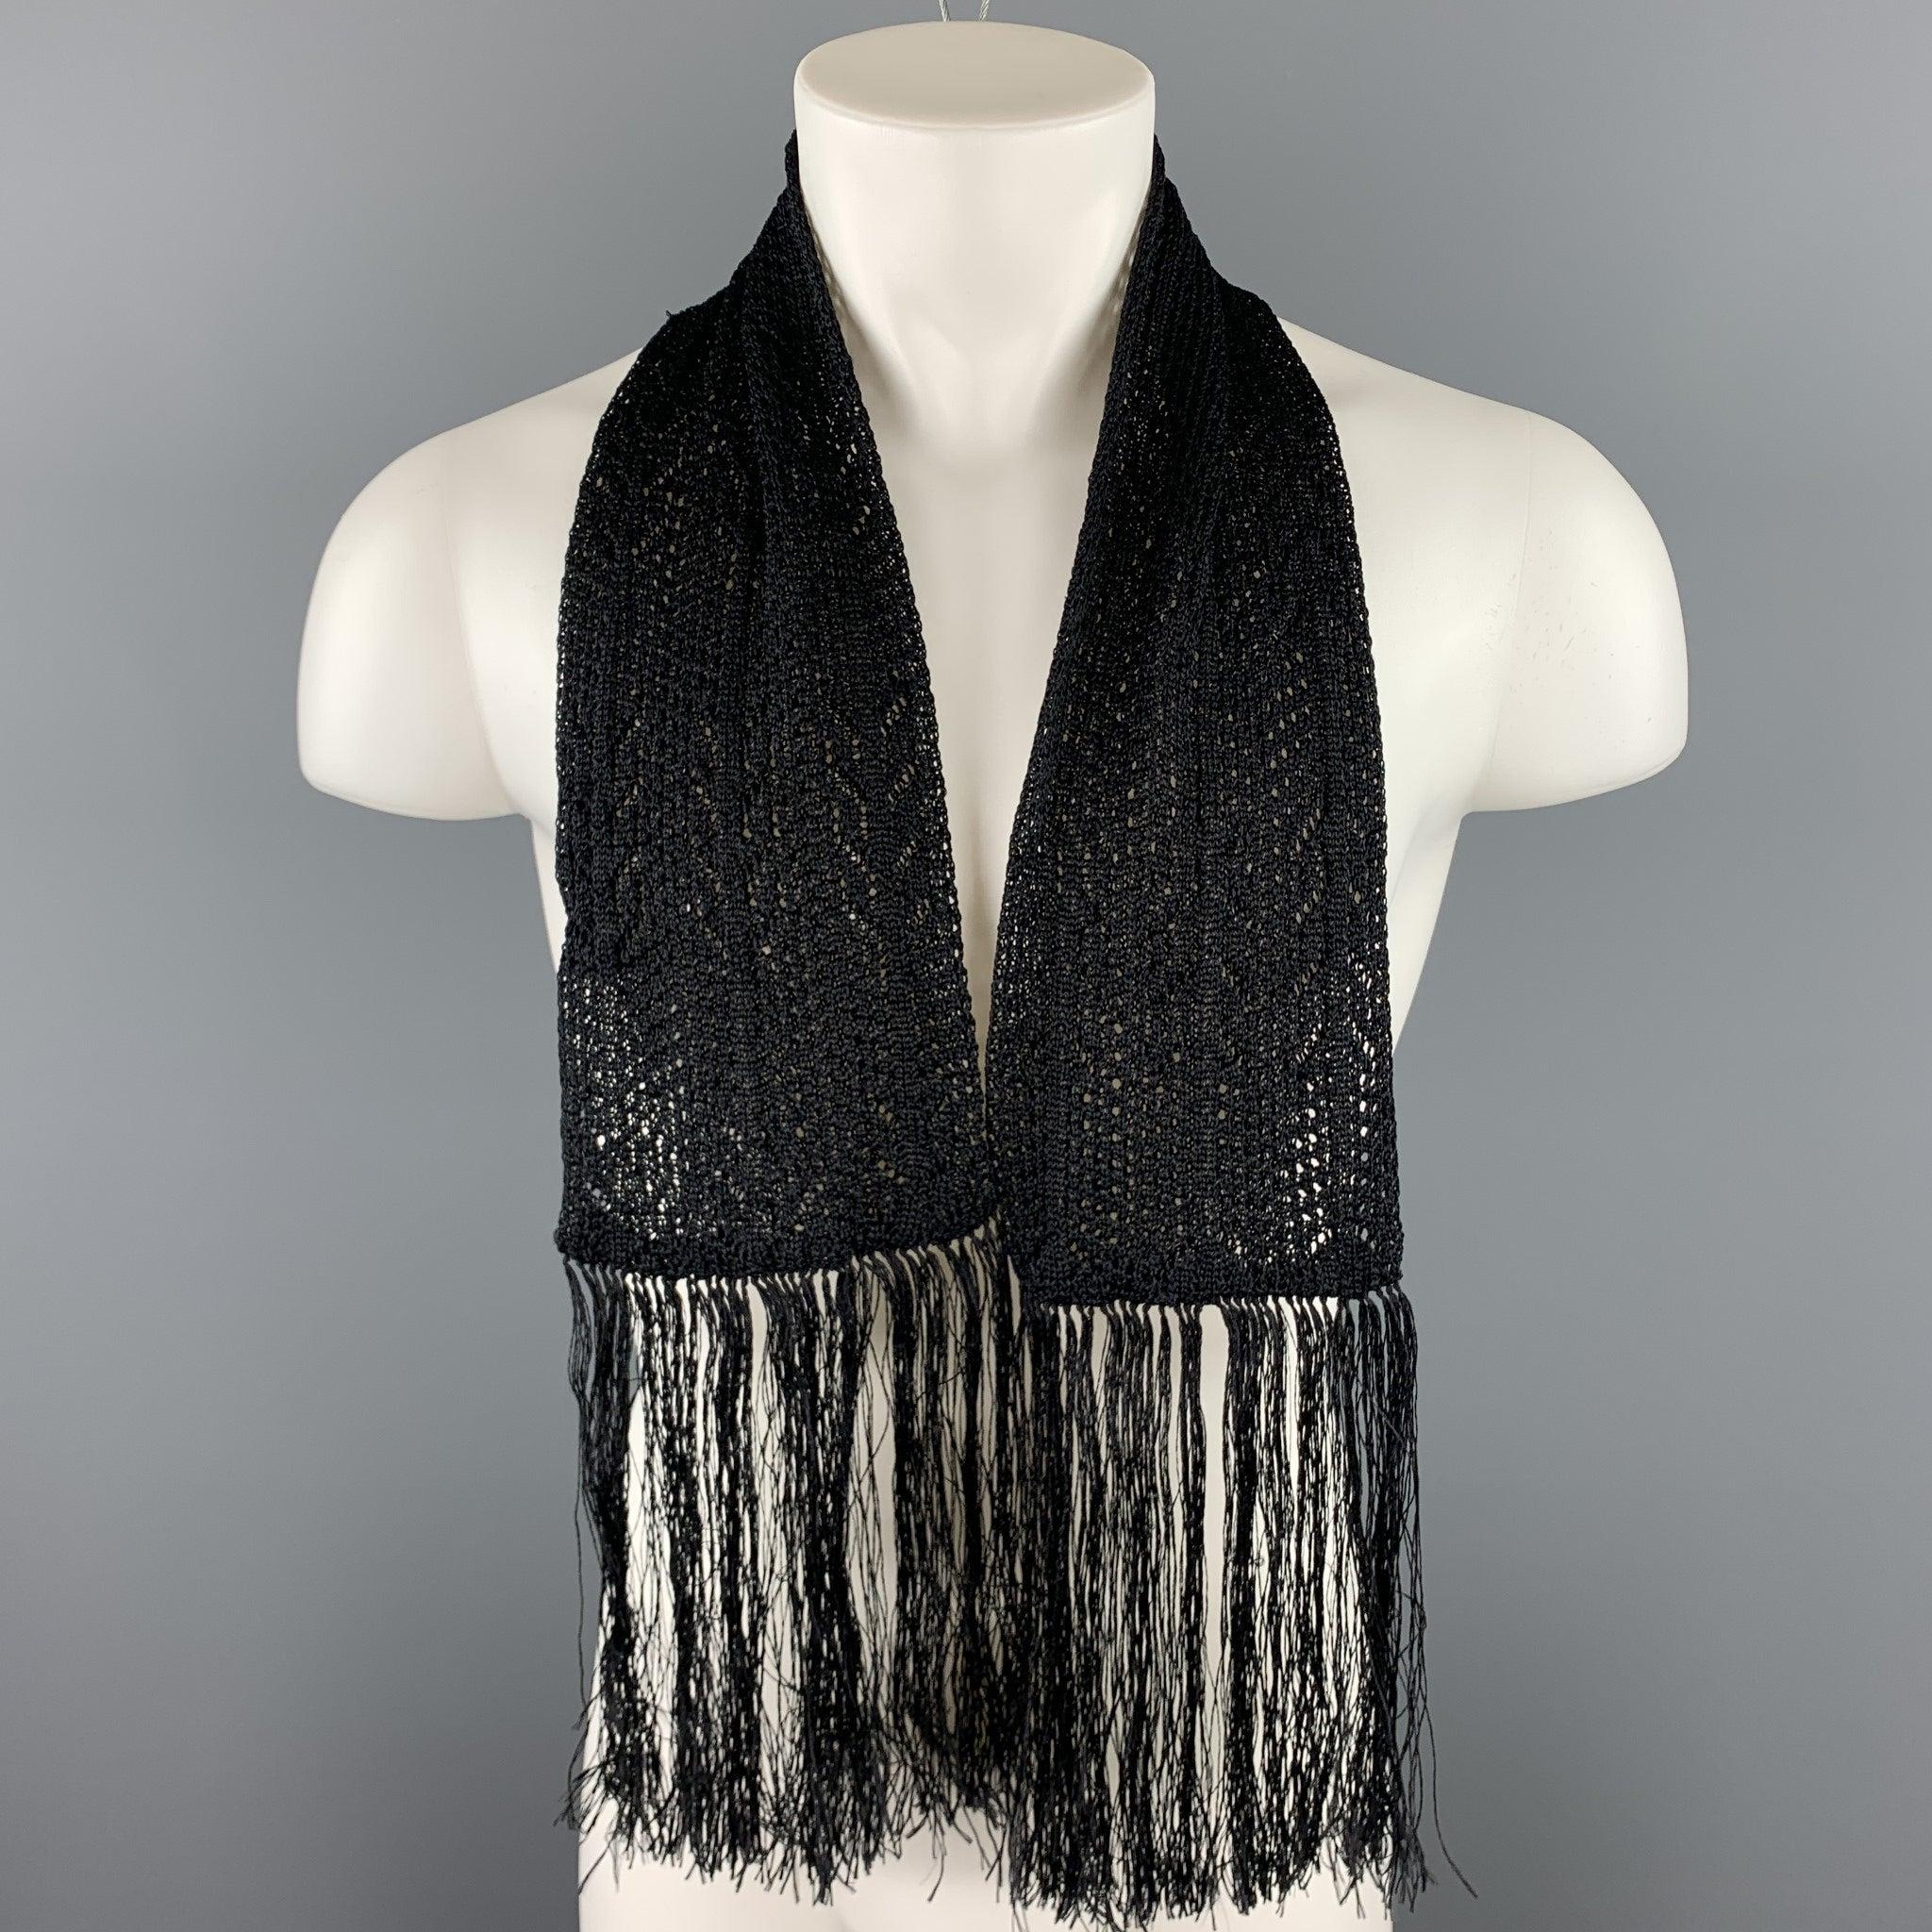 YVES SAINT LAURENT scarf comes in a black knitted silk with a eight inch fringe trim. Made in Italy.Very Good Pre-Owned Condition.
  
 

 Measurements: 
  6 inches x 48 inches 
  
  
  
 Sui Generis Reference: 105121
 Category: Scarves
 More